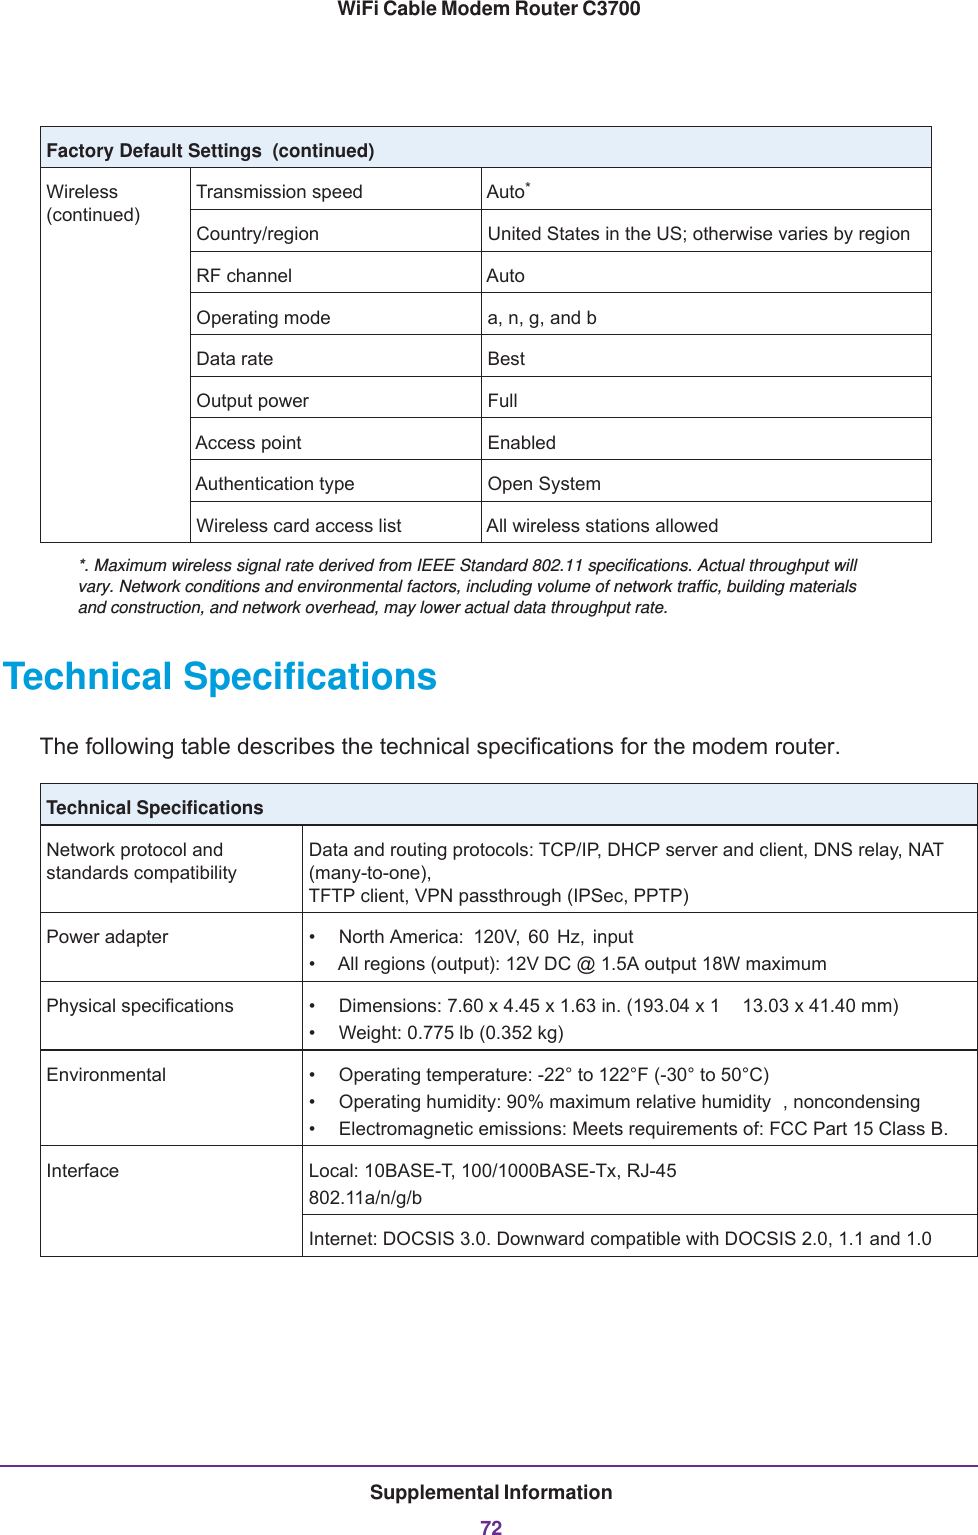 Supplemental Information72WiFi Cable Modem Router C3700Technical SpecificationsThe following table describes the technical specifications for the modem router.Technical Specifications Network protocol and standards compatibilityData and routing protocols: TCP/IP, DHCP server and client, DNS relay, NAT (many-to-one),  TFTP client, VPN passthrough (IPSec, PPTP)Power adapter • North America:  120V, 60 Hz, input• All regions (output): 12V DC @ 1.5A output 18W maximumPhysical specifications • Dimensions: 7.60 x 4.45 x 1.63 in. (193.04 x 1 13.03 x 41.40 mm)• Weight: 0.775 lb (0.352 kg)Environmental • Operating temperature: -22° to 122°F (-30° to 50°C)• Operating humidity: 90% maximum relative humidity , noncondensing• Electromagnetic emissions: Meets requirements of: FCC Part 15 Class B.Interface Local: 10BASE-T, 100/1000BASE-Tx, RJ-45802.11a/n/g/bInternet: DOCSIS 3.0. Downward compatible with DOCSIS 2.0, 1.1 and 1.0Wireless (continued)Transmission speed Auto*Country/region United States in the US; otherwise varies by regionRF channel AutoOperating mode a, n, g, and bData rate BestOutput power FullAccess point EnabledAuthentication type Open SystemWireless card access list All wireless stations allowed*. Maximum wireless signal rate derived from IEEE Standard 802.11 specifications. Actual throughput will vary. Network conditions and environmental factors, including volume of network traffic, building materials and construction, and network overhead, may lower actual data throughput rate.Factory Default Settings  (continued)